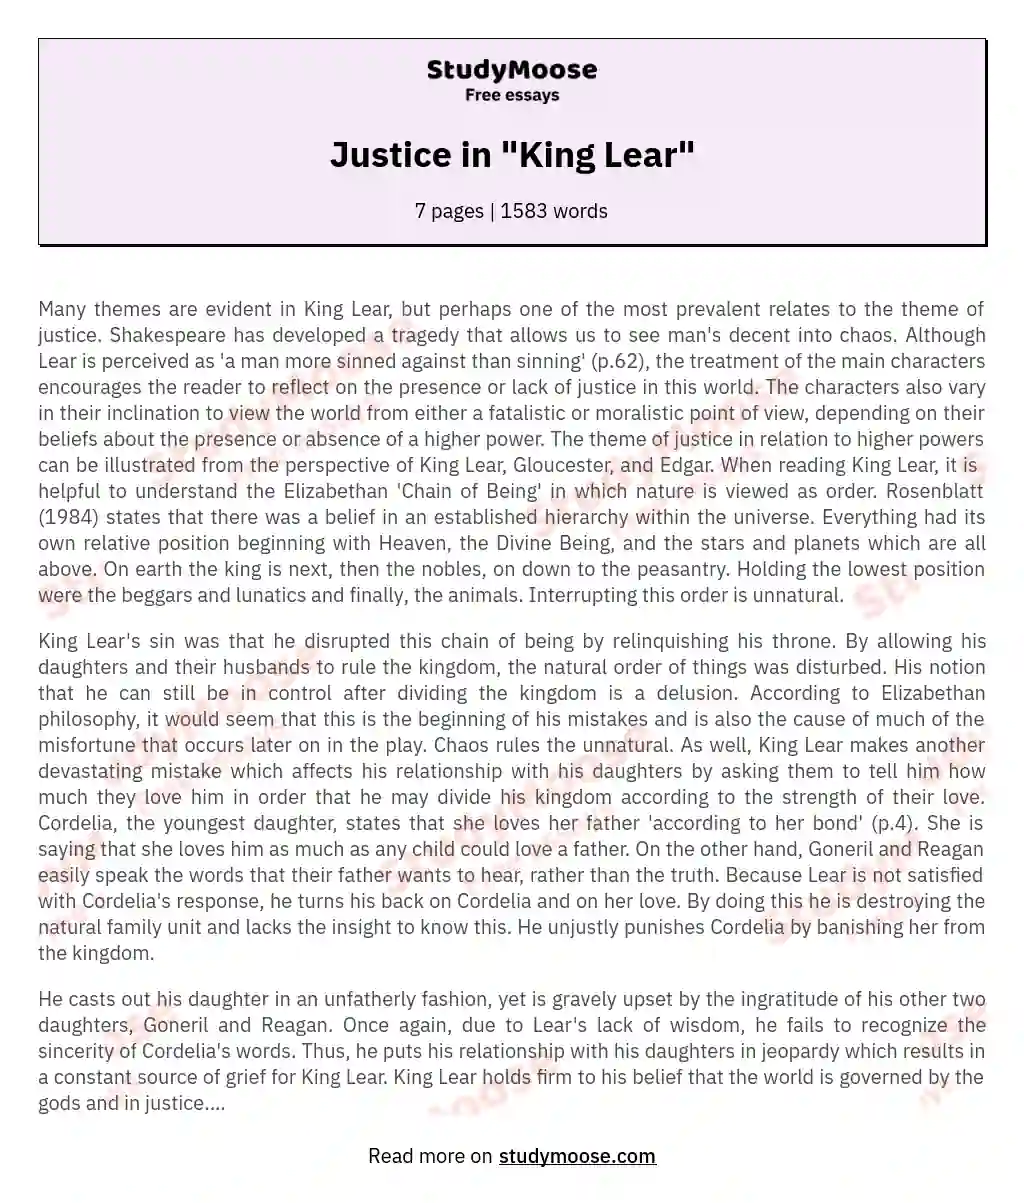 Justice in "King Lear" essay